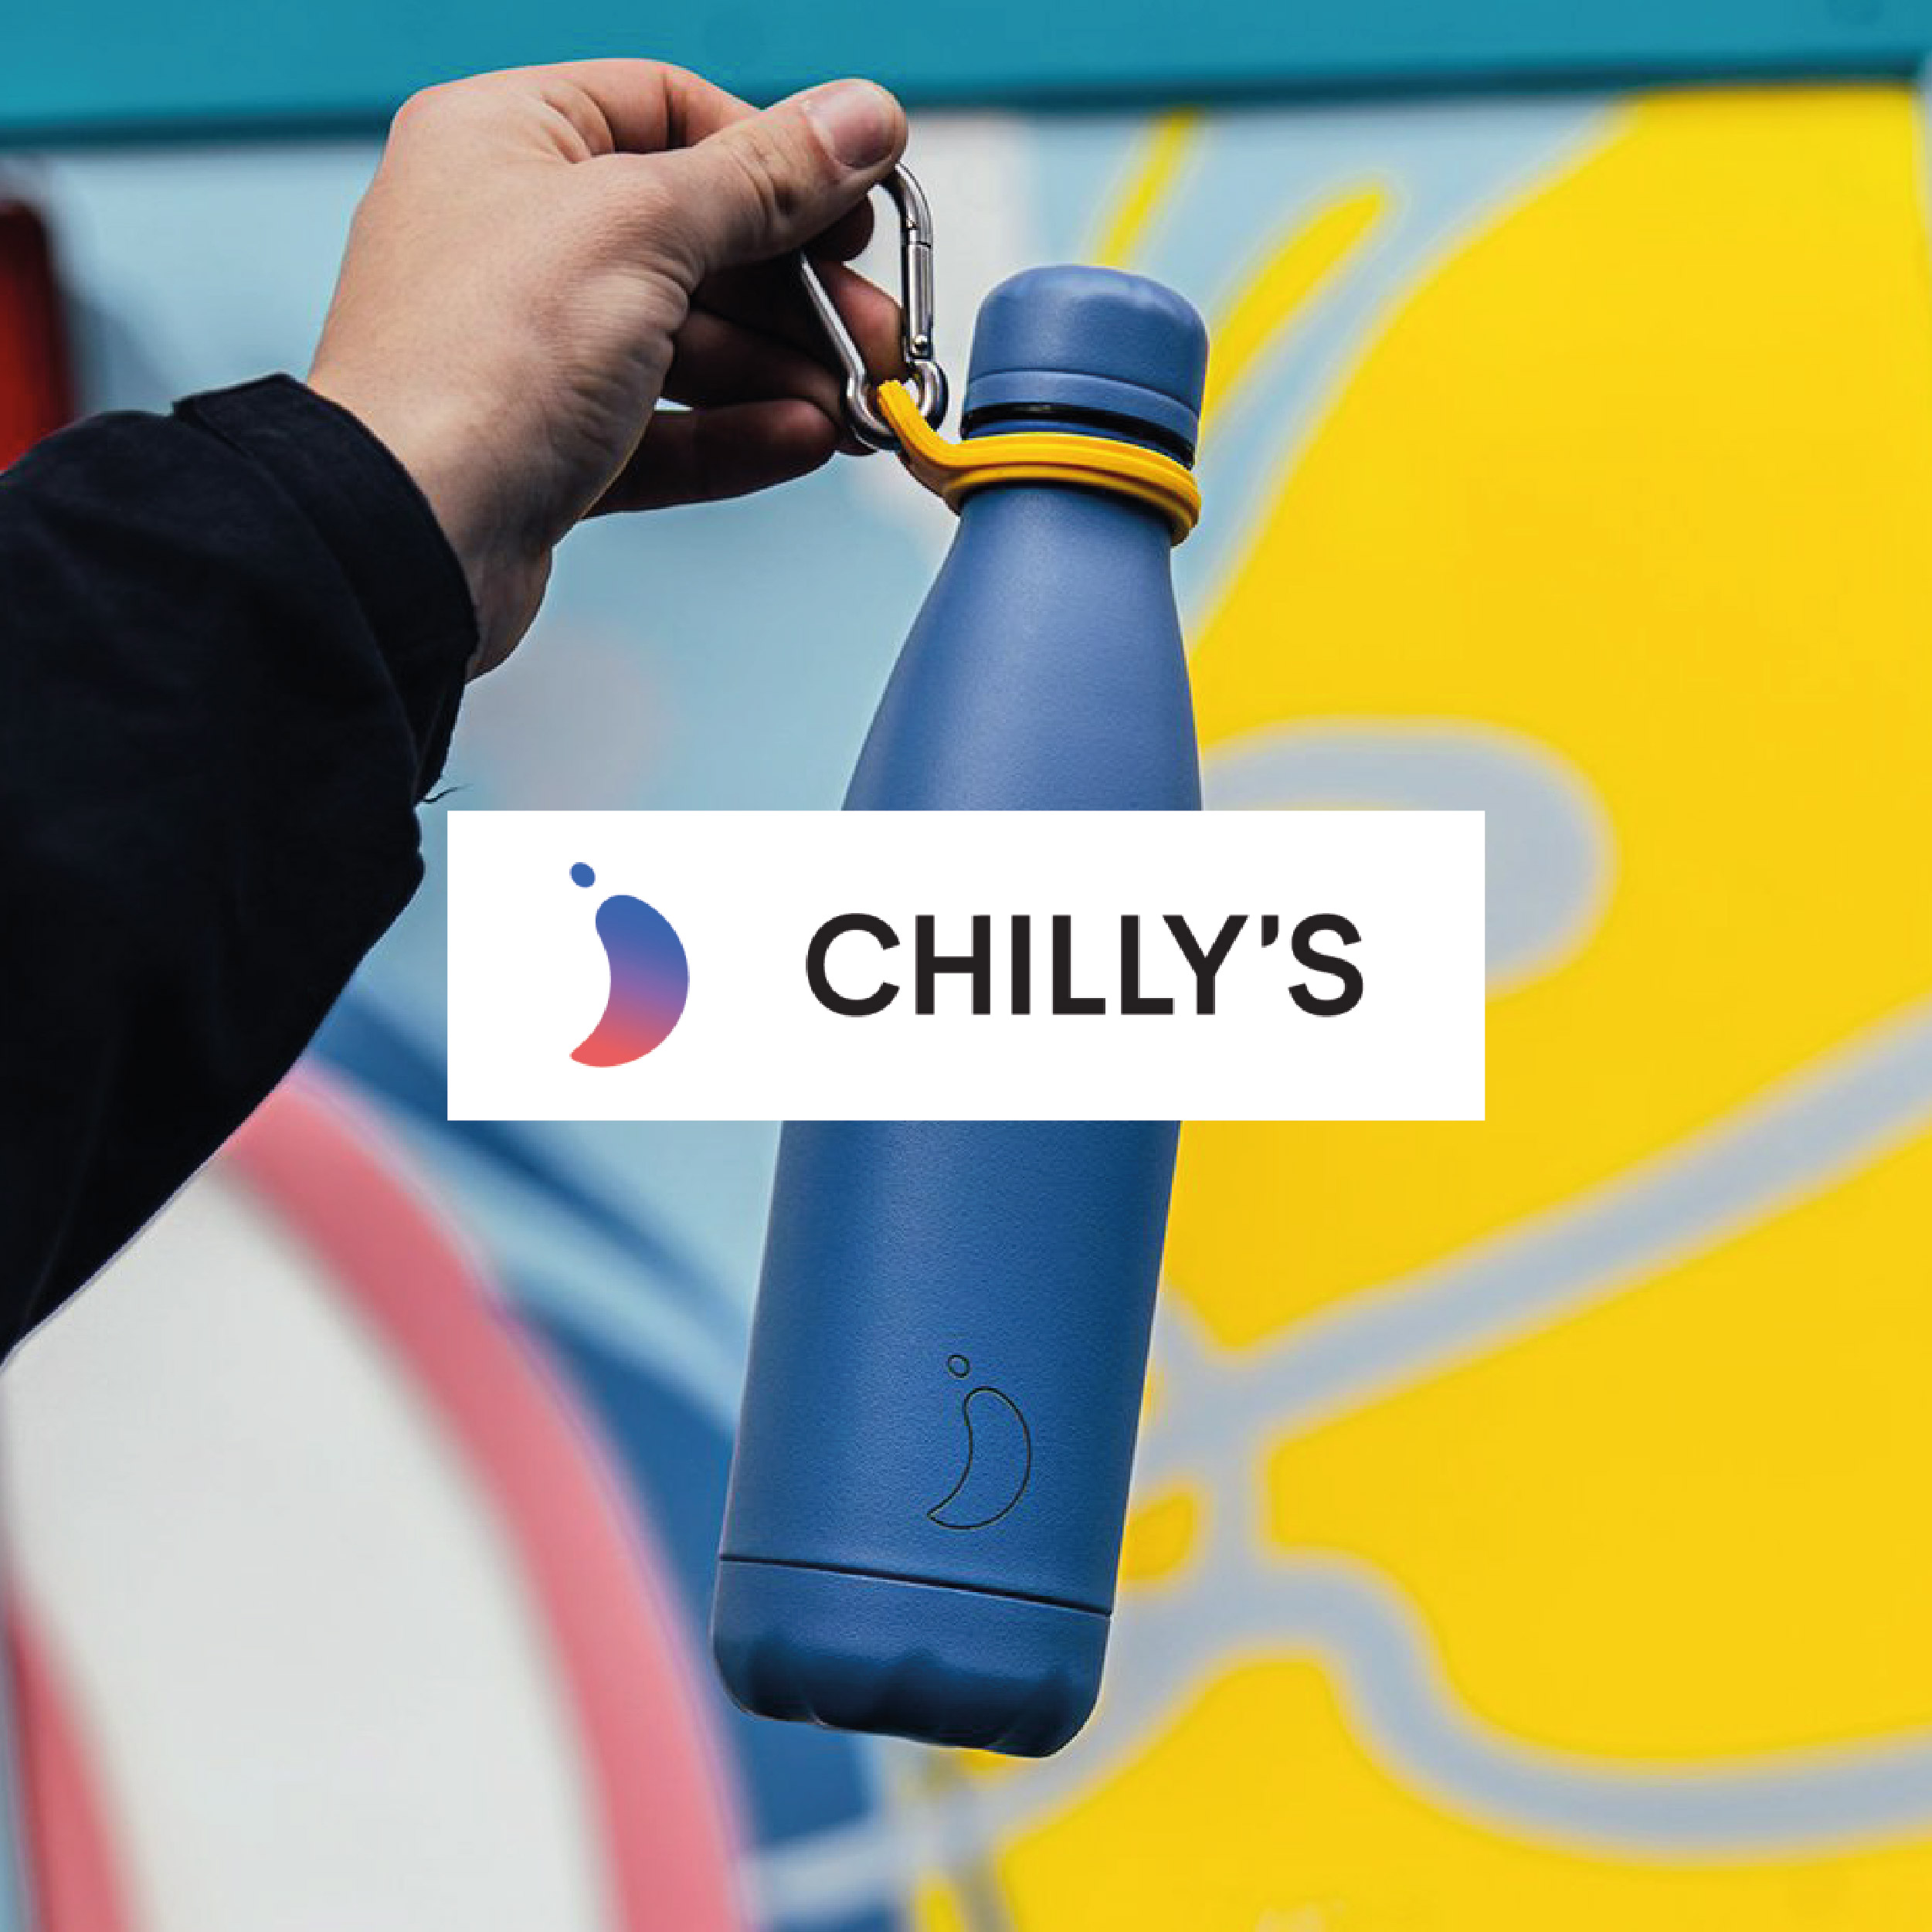 PromoBrand_Chillys_Bottle_Promotional_Merchandise_Brands_Bounce_Creative_Designs